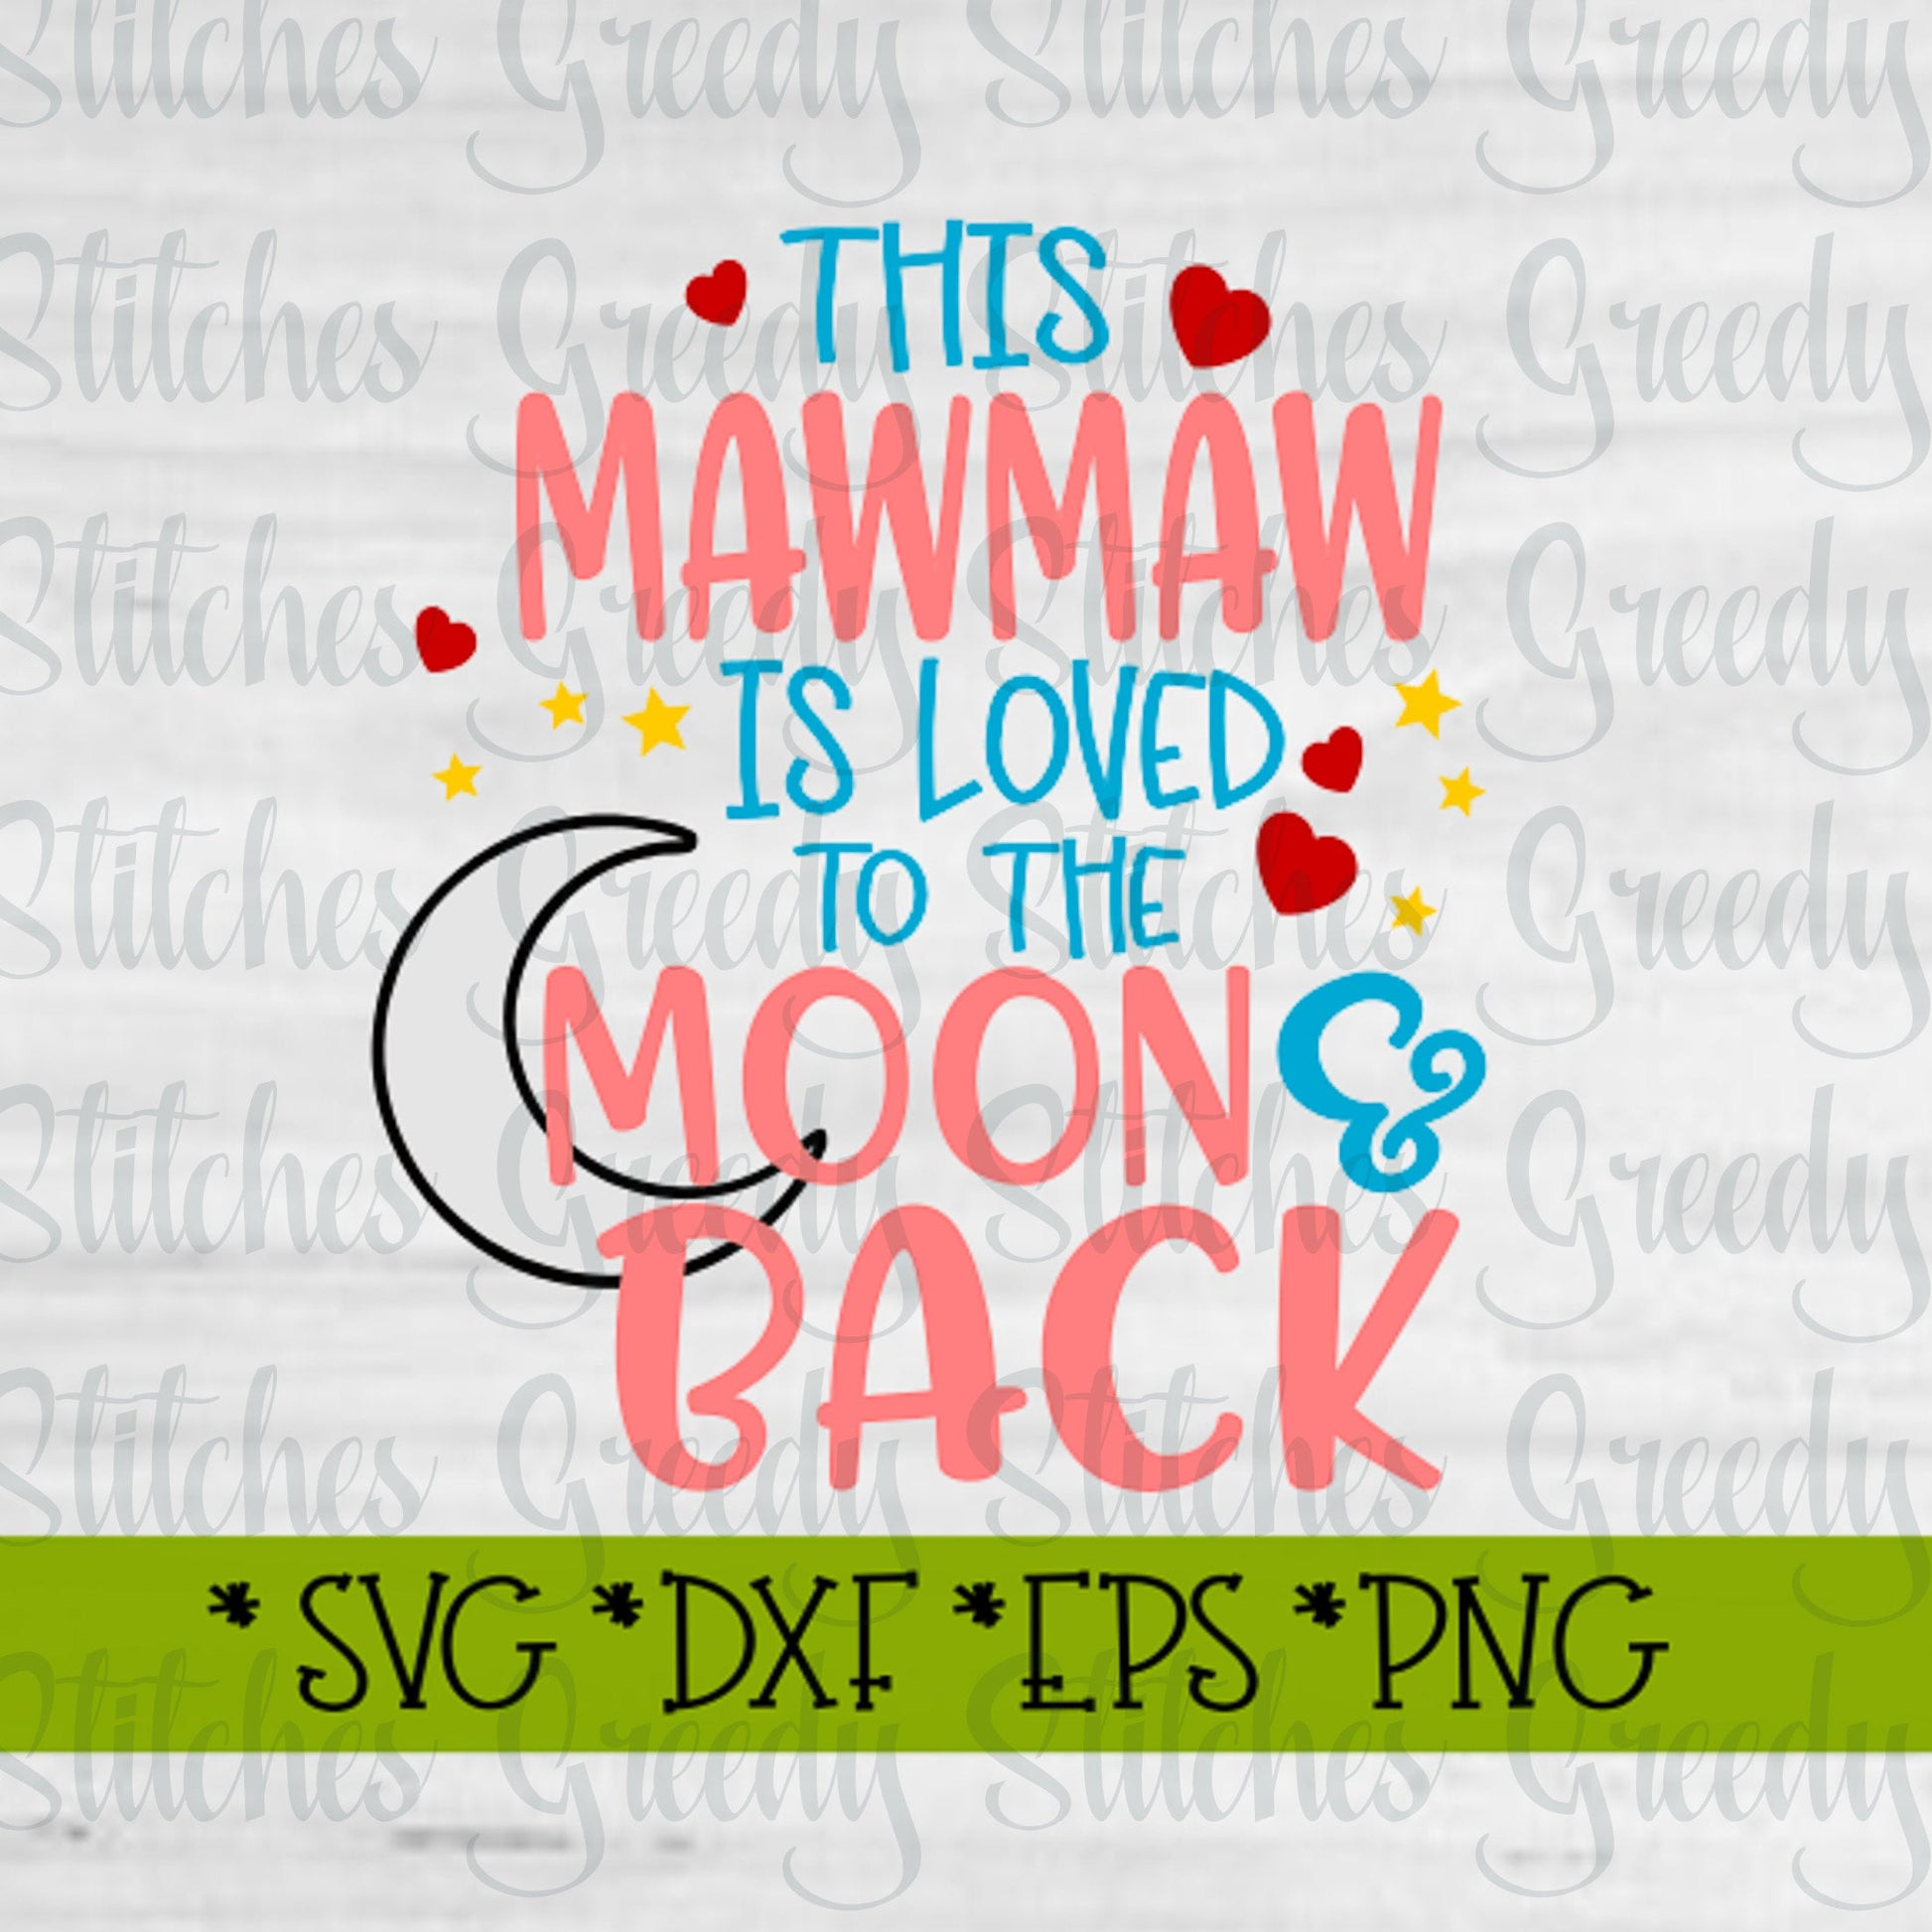 Mother&#39;s Day | This Mawmaw Is Loved To The Moon & Back svg, dxf, eps, png, wmf. Mawmaw SVG | Mawmaw Is Loved SVG | Instant Download Cut File